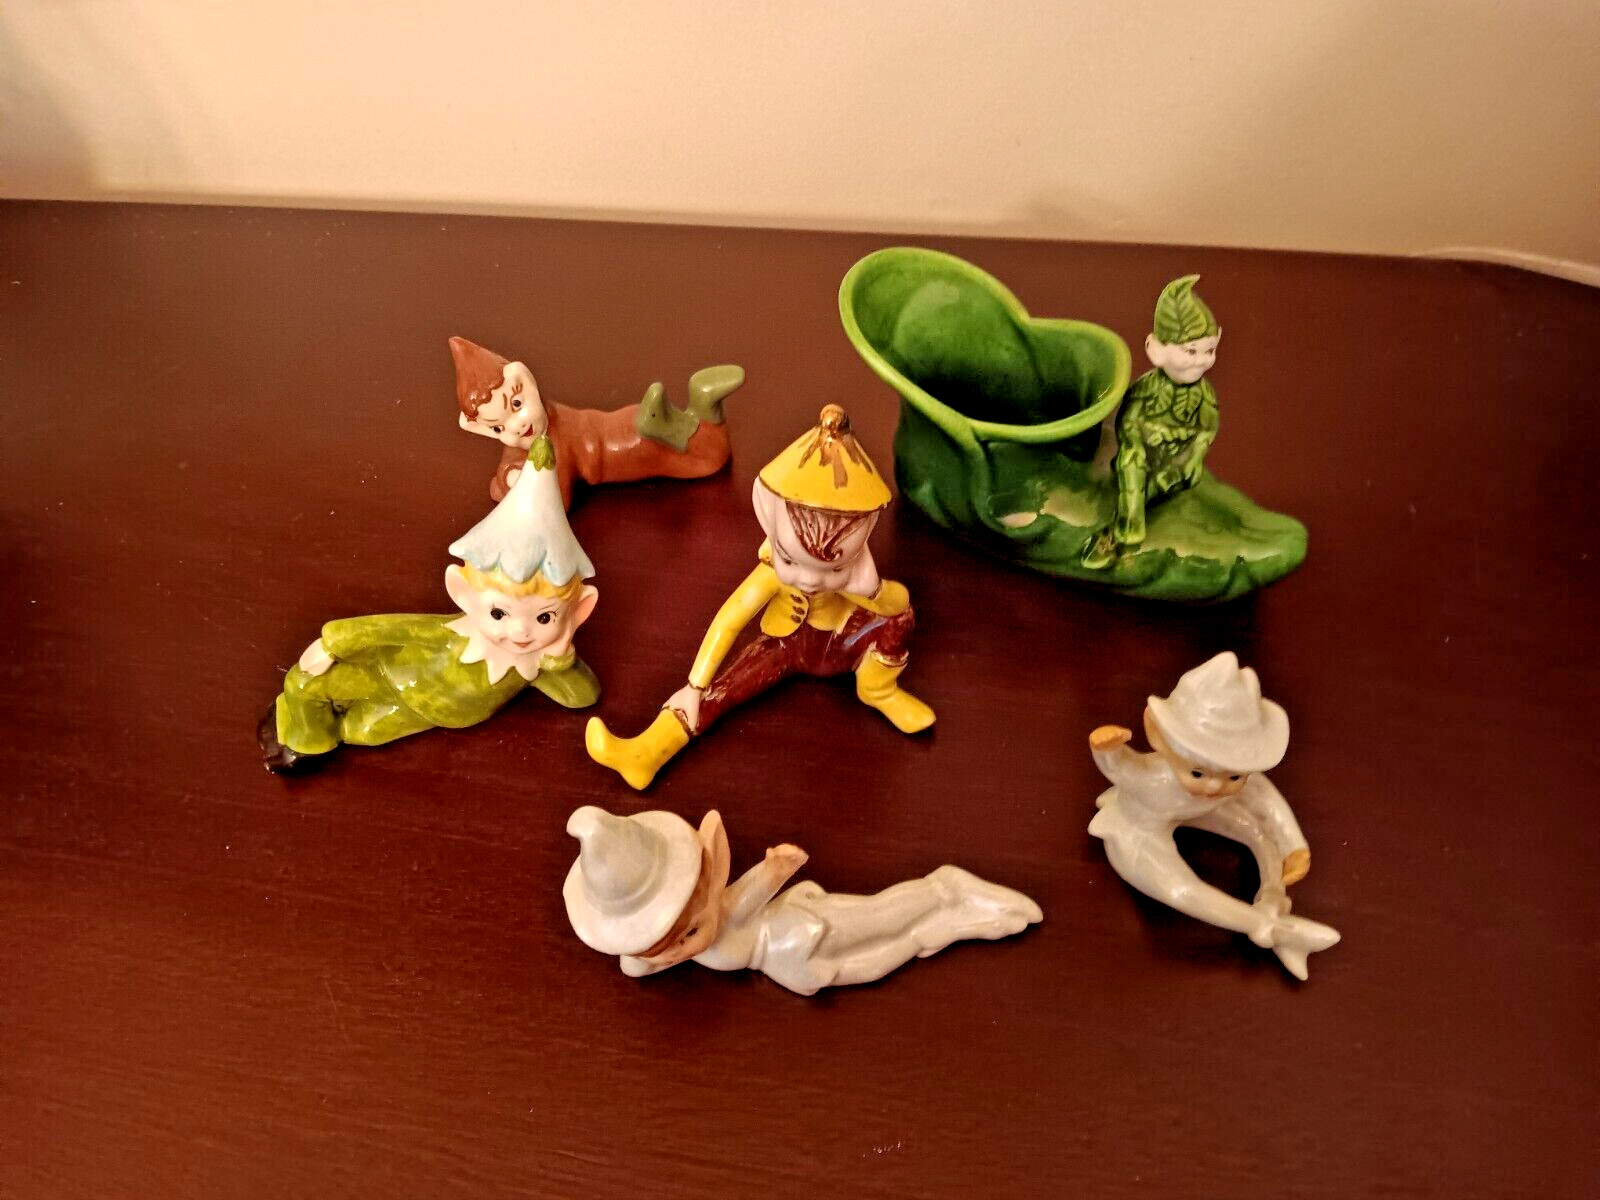 Elf Pixie Figurines Vintage Lot of 6 - All are Different